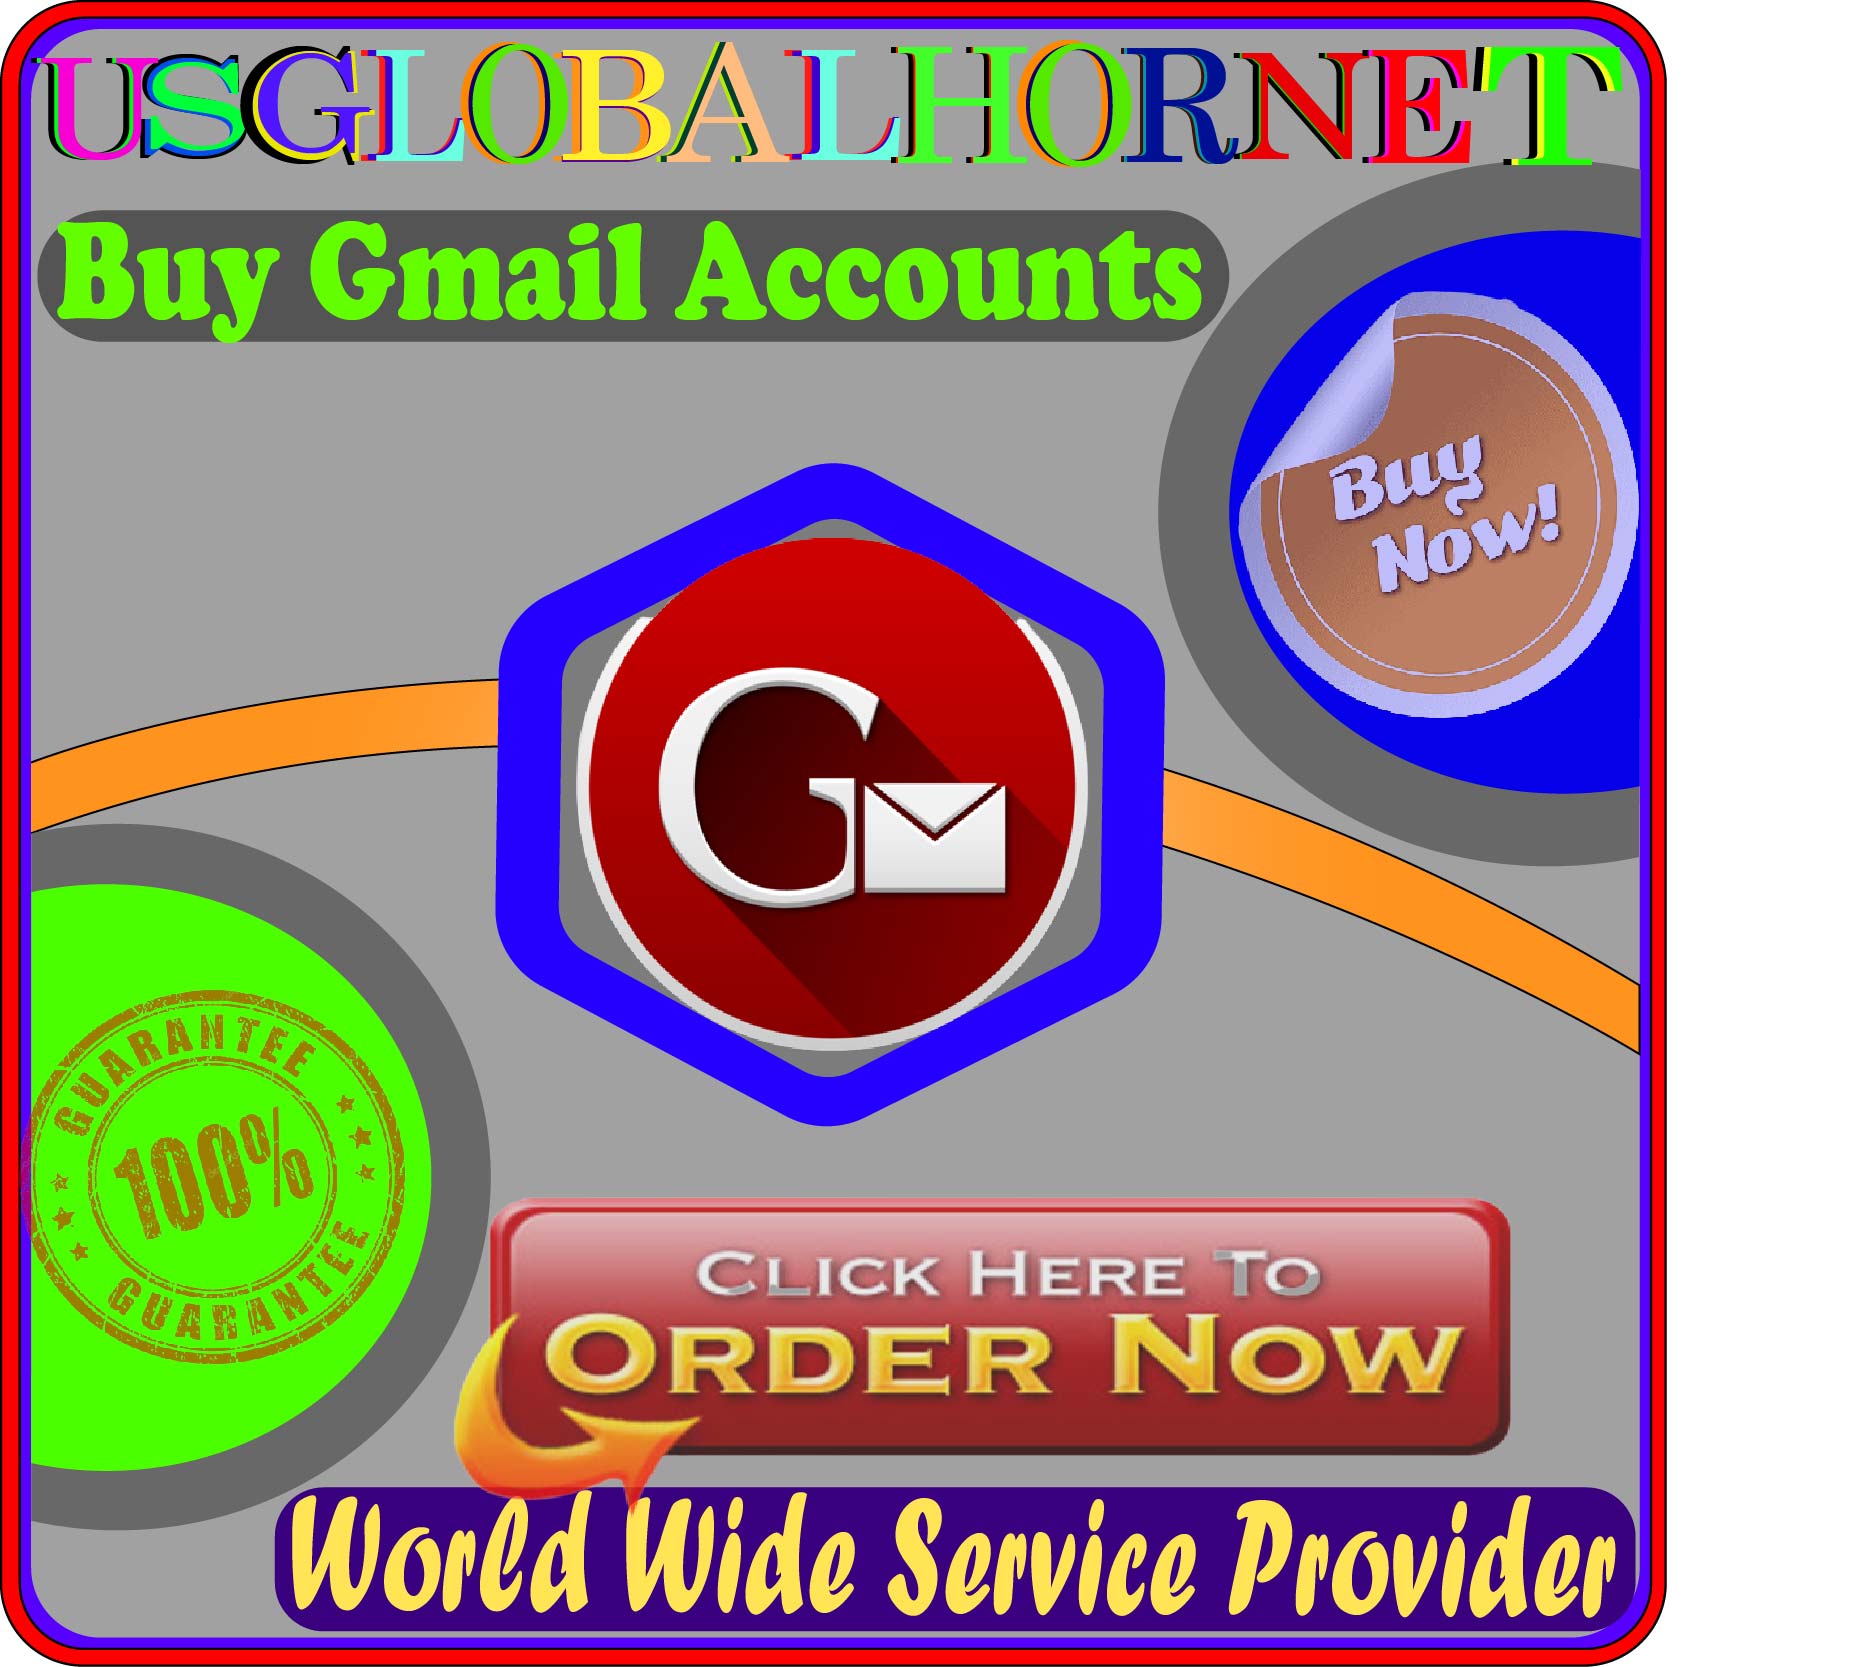 Buy Gmail Accounts - 100% New & Old Gmail Account Provider